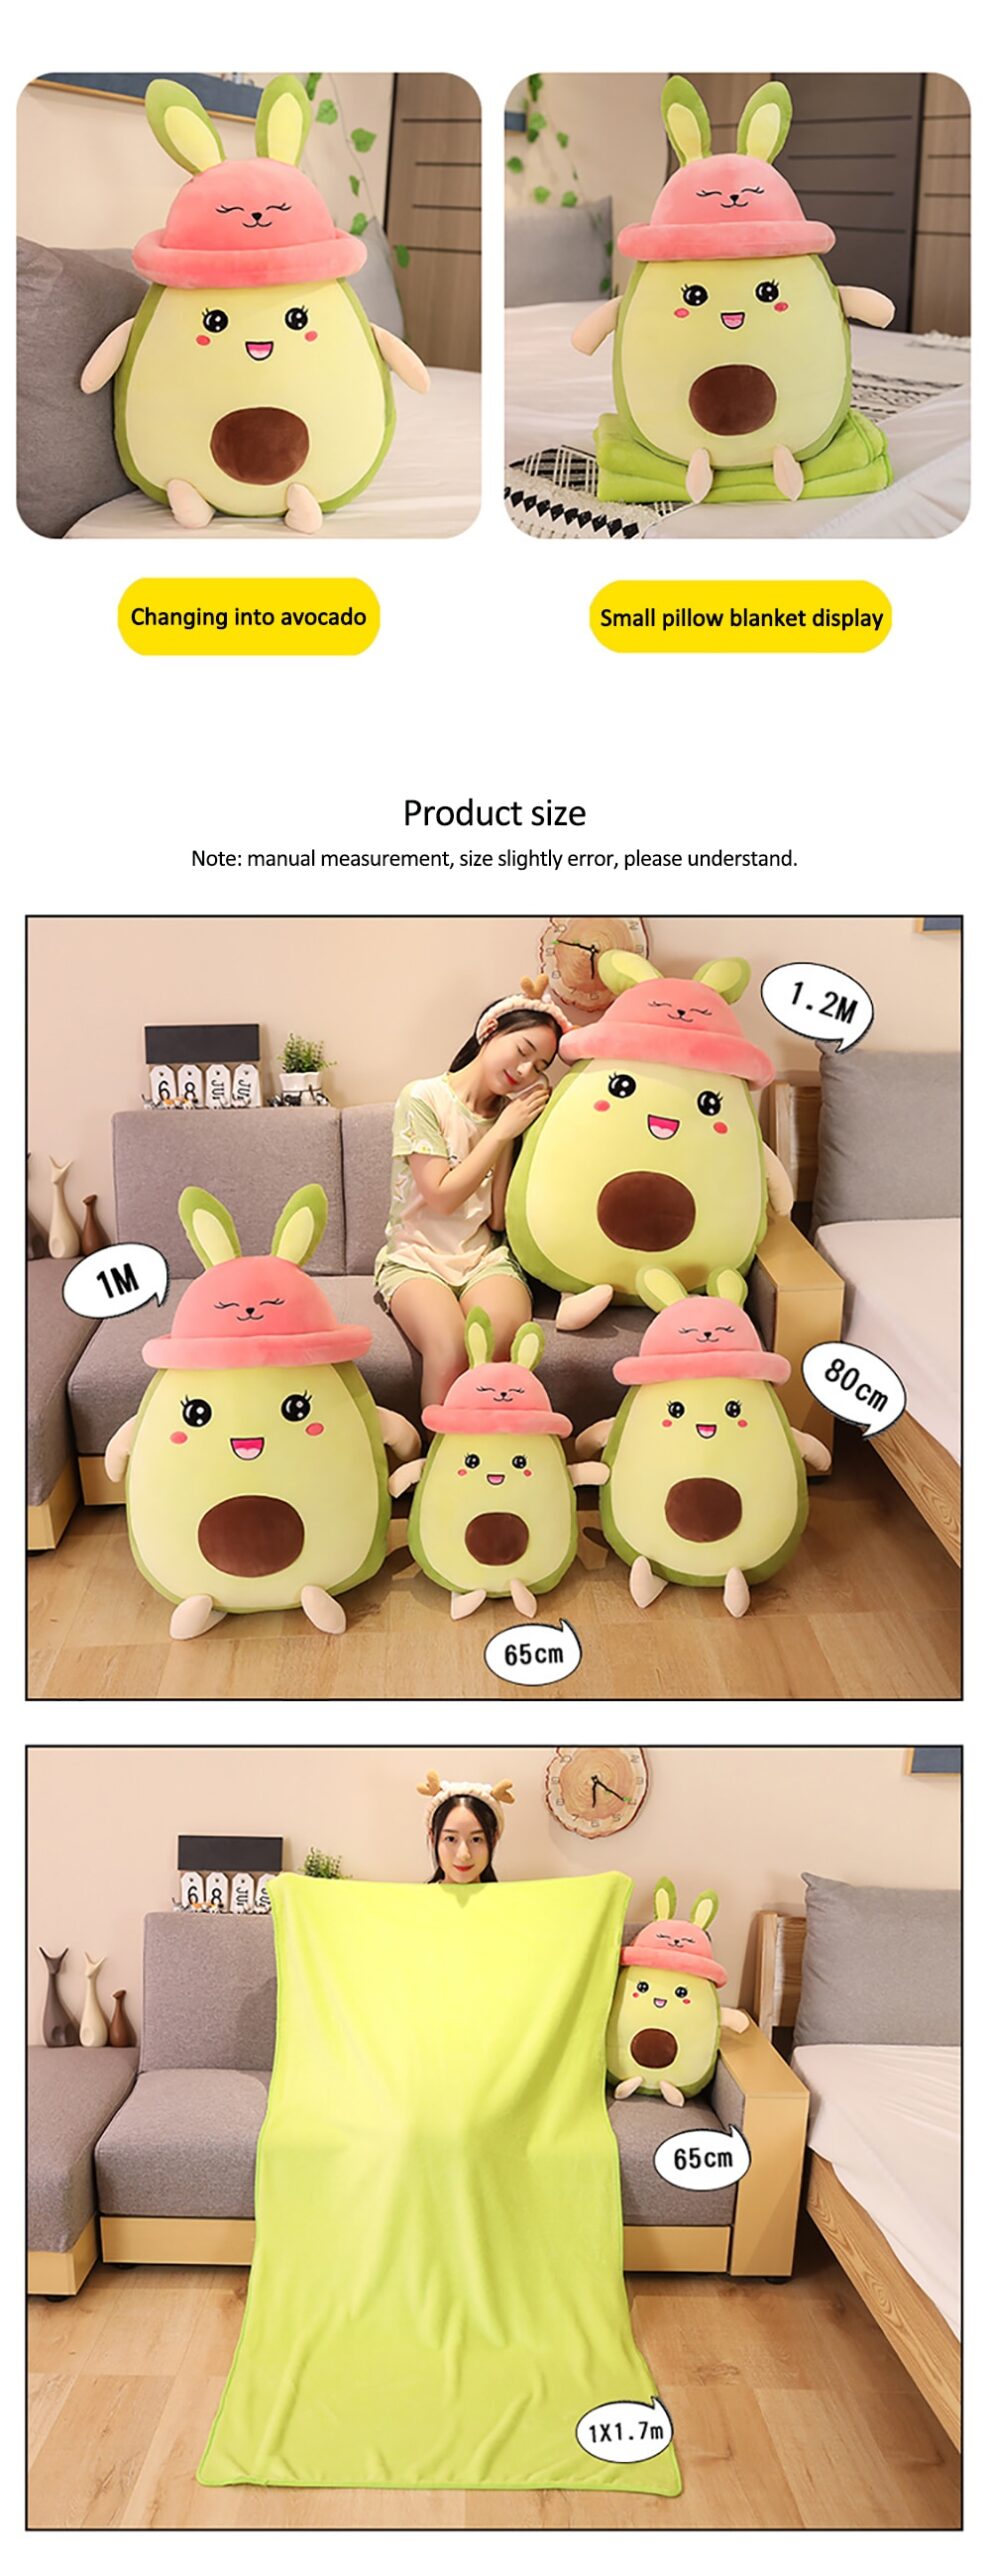 80cm Large Avocado Plush Toys Kawaii Soft Stuffed Doll With Blanket Christmas Decor Plushie Toys For Children Gift To Girlfriend